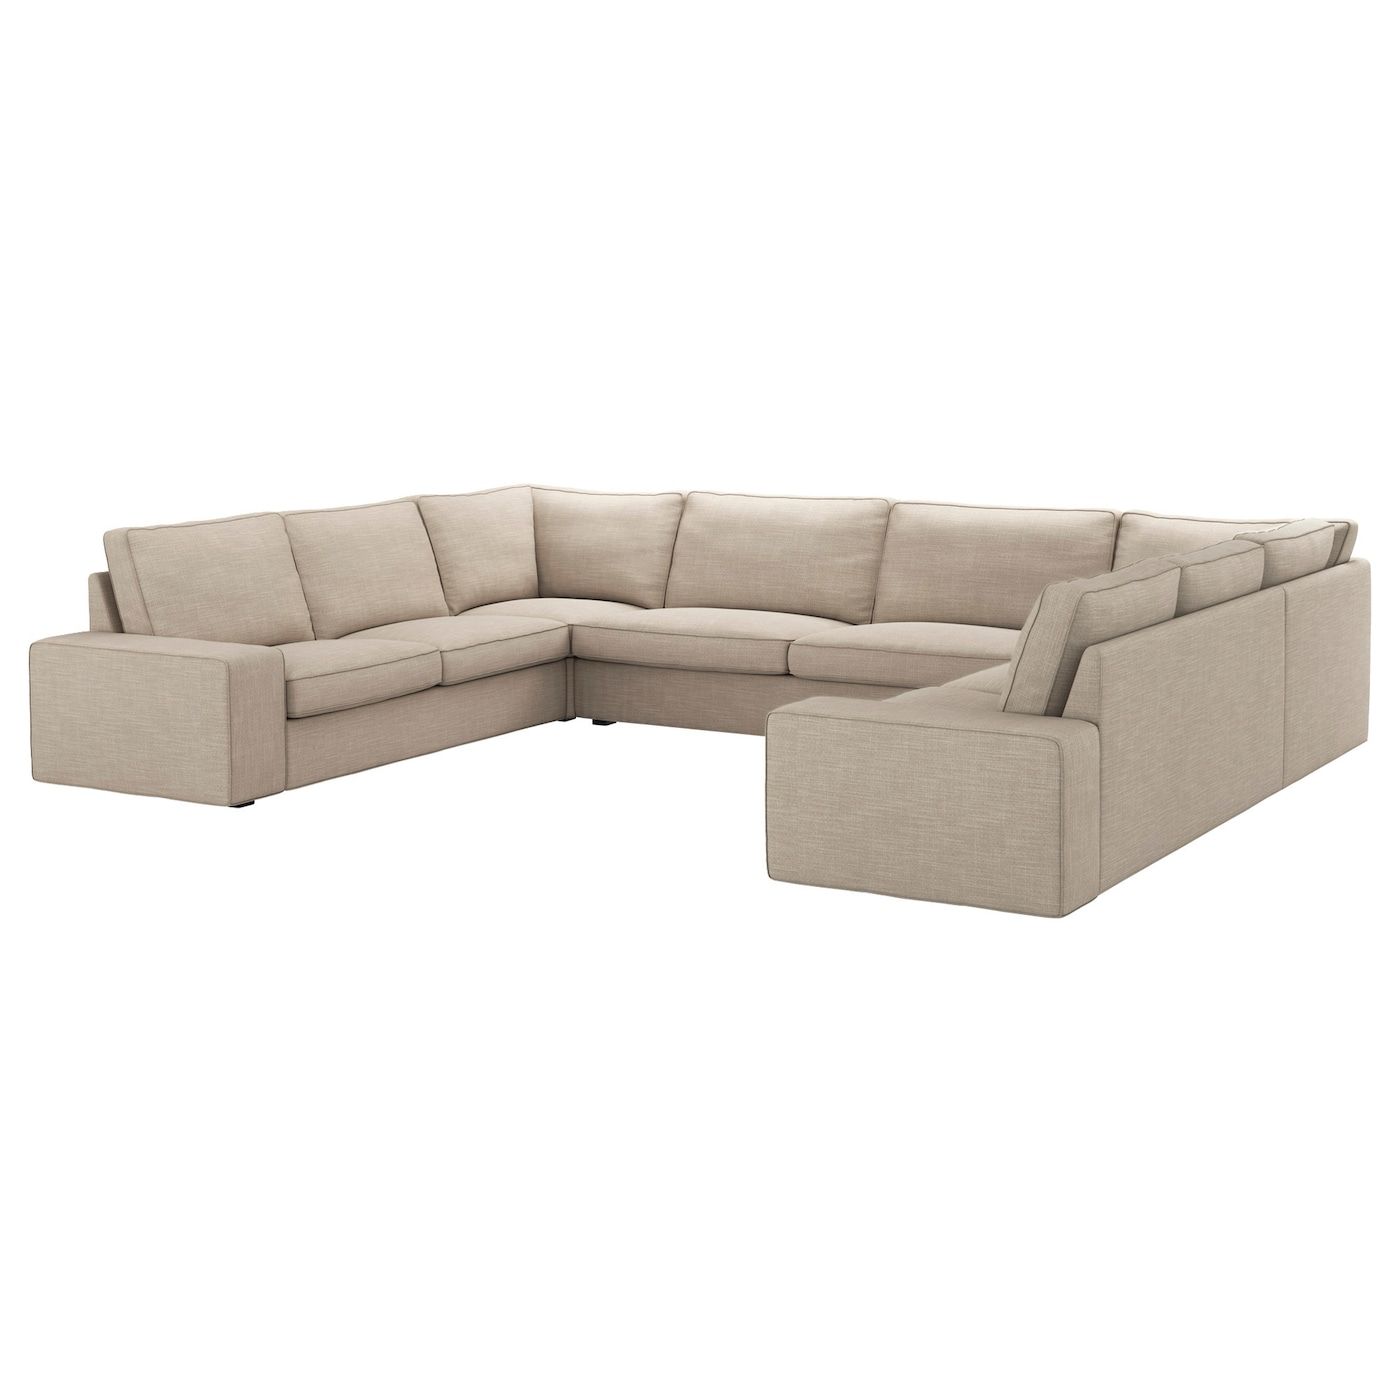 Kivik Canapé En U, 6 Places – Hillared 9 Places Beige – Ikea In U Shaped Couches In Beige (Gallery 1 of 20)